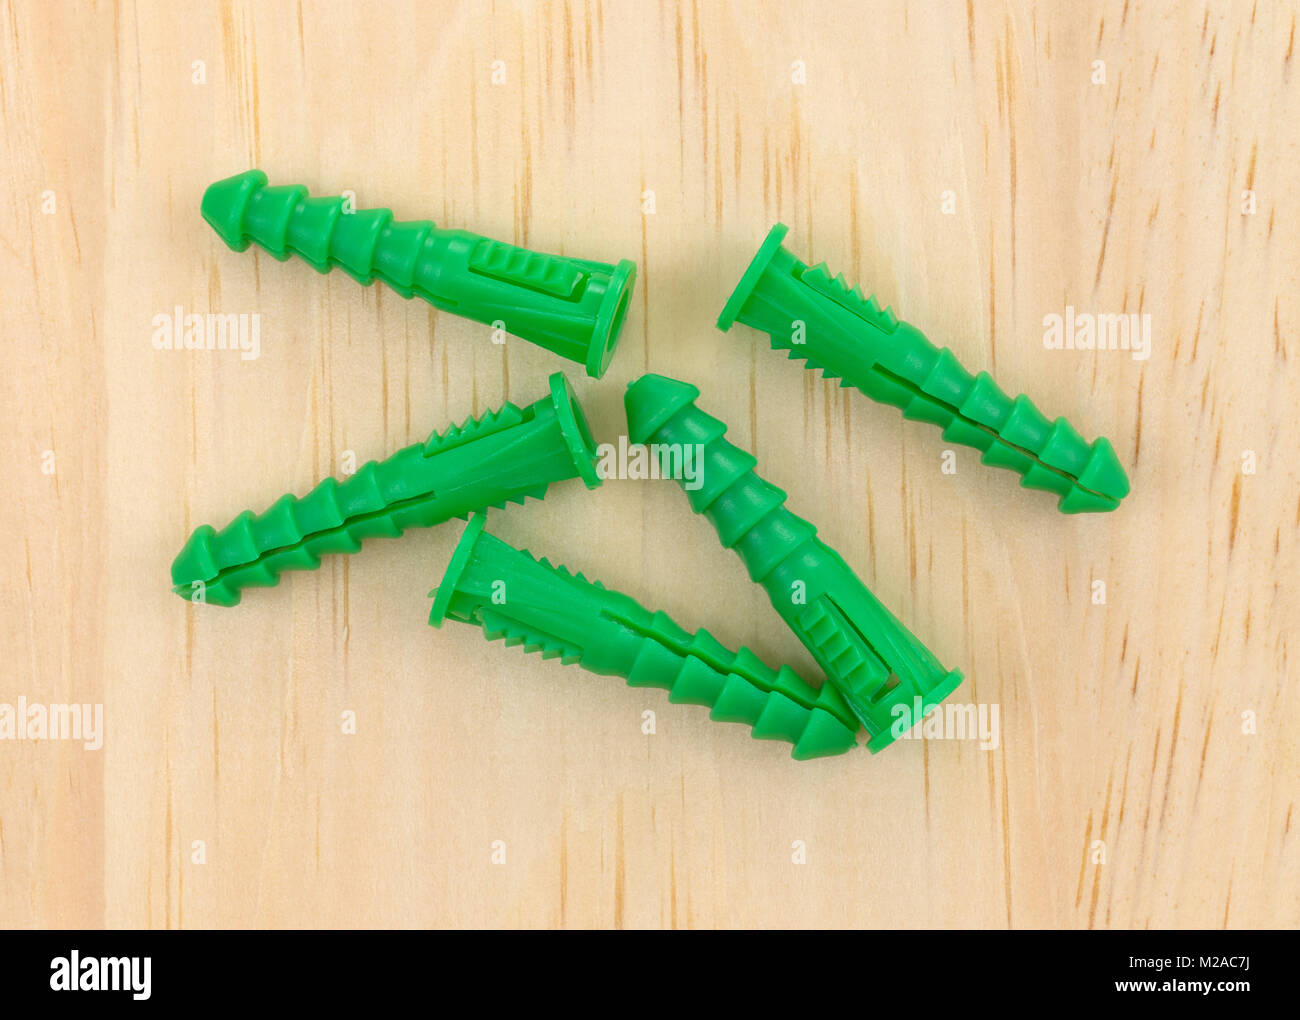 Top view of a group of green plastic drywall anchors on a pine board. Stock Photo